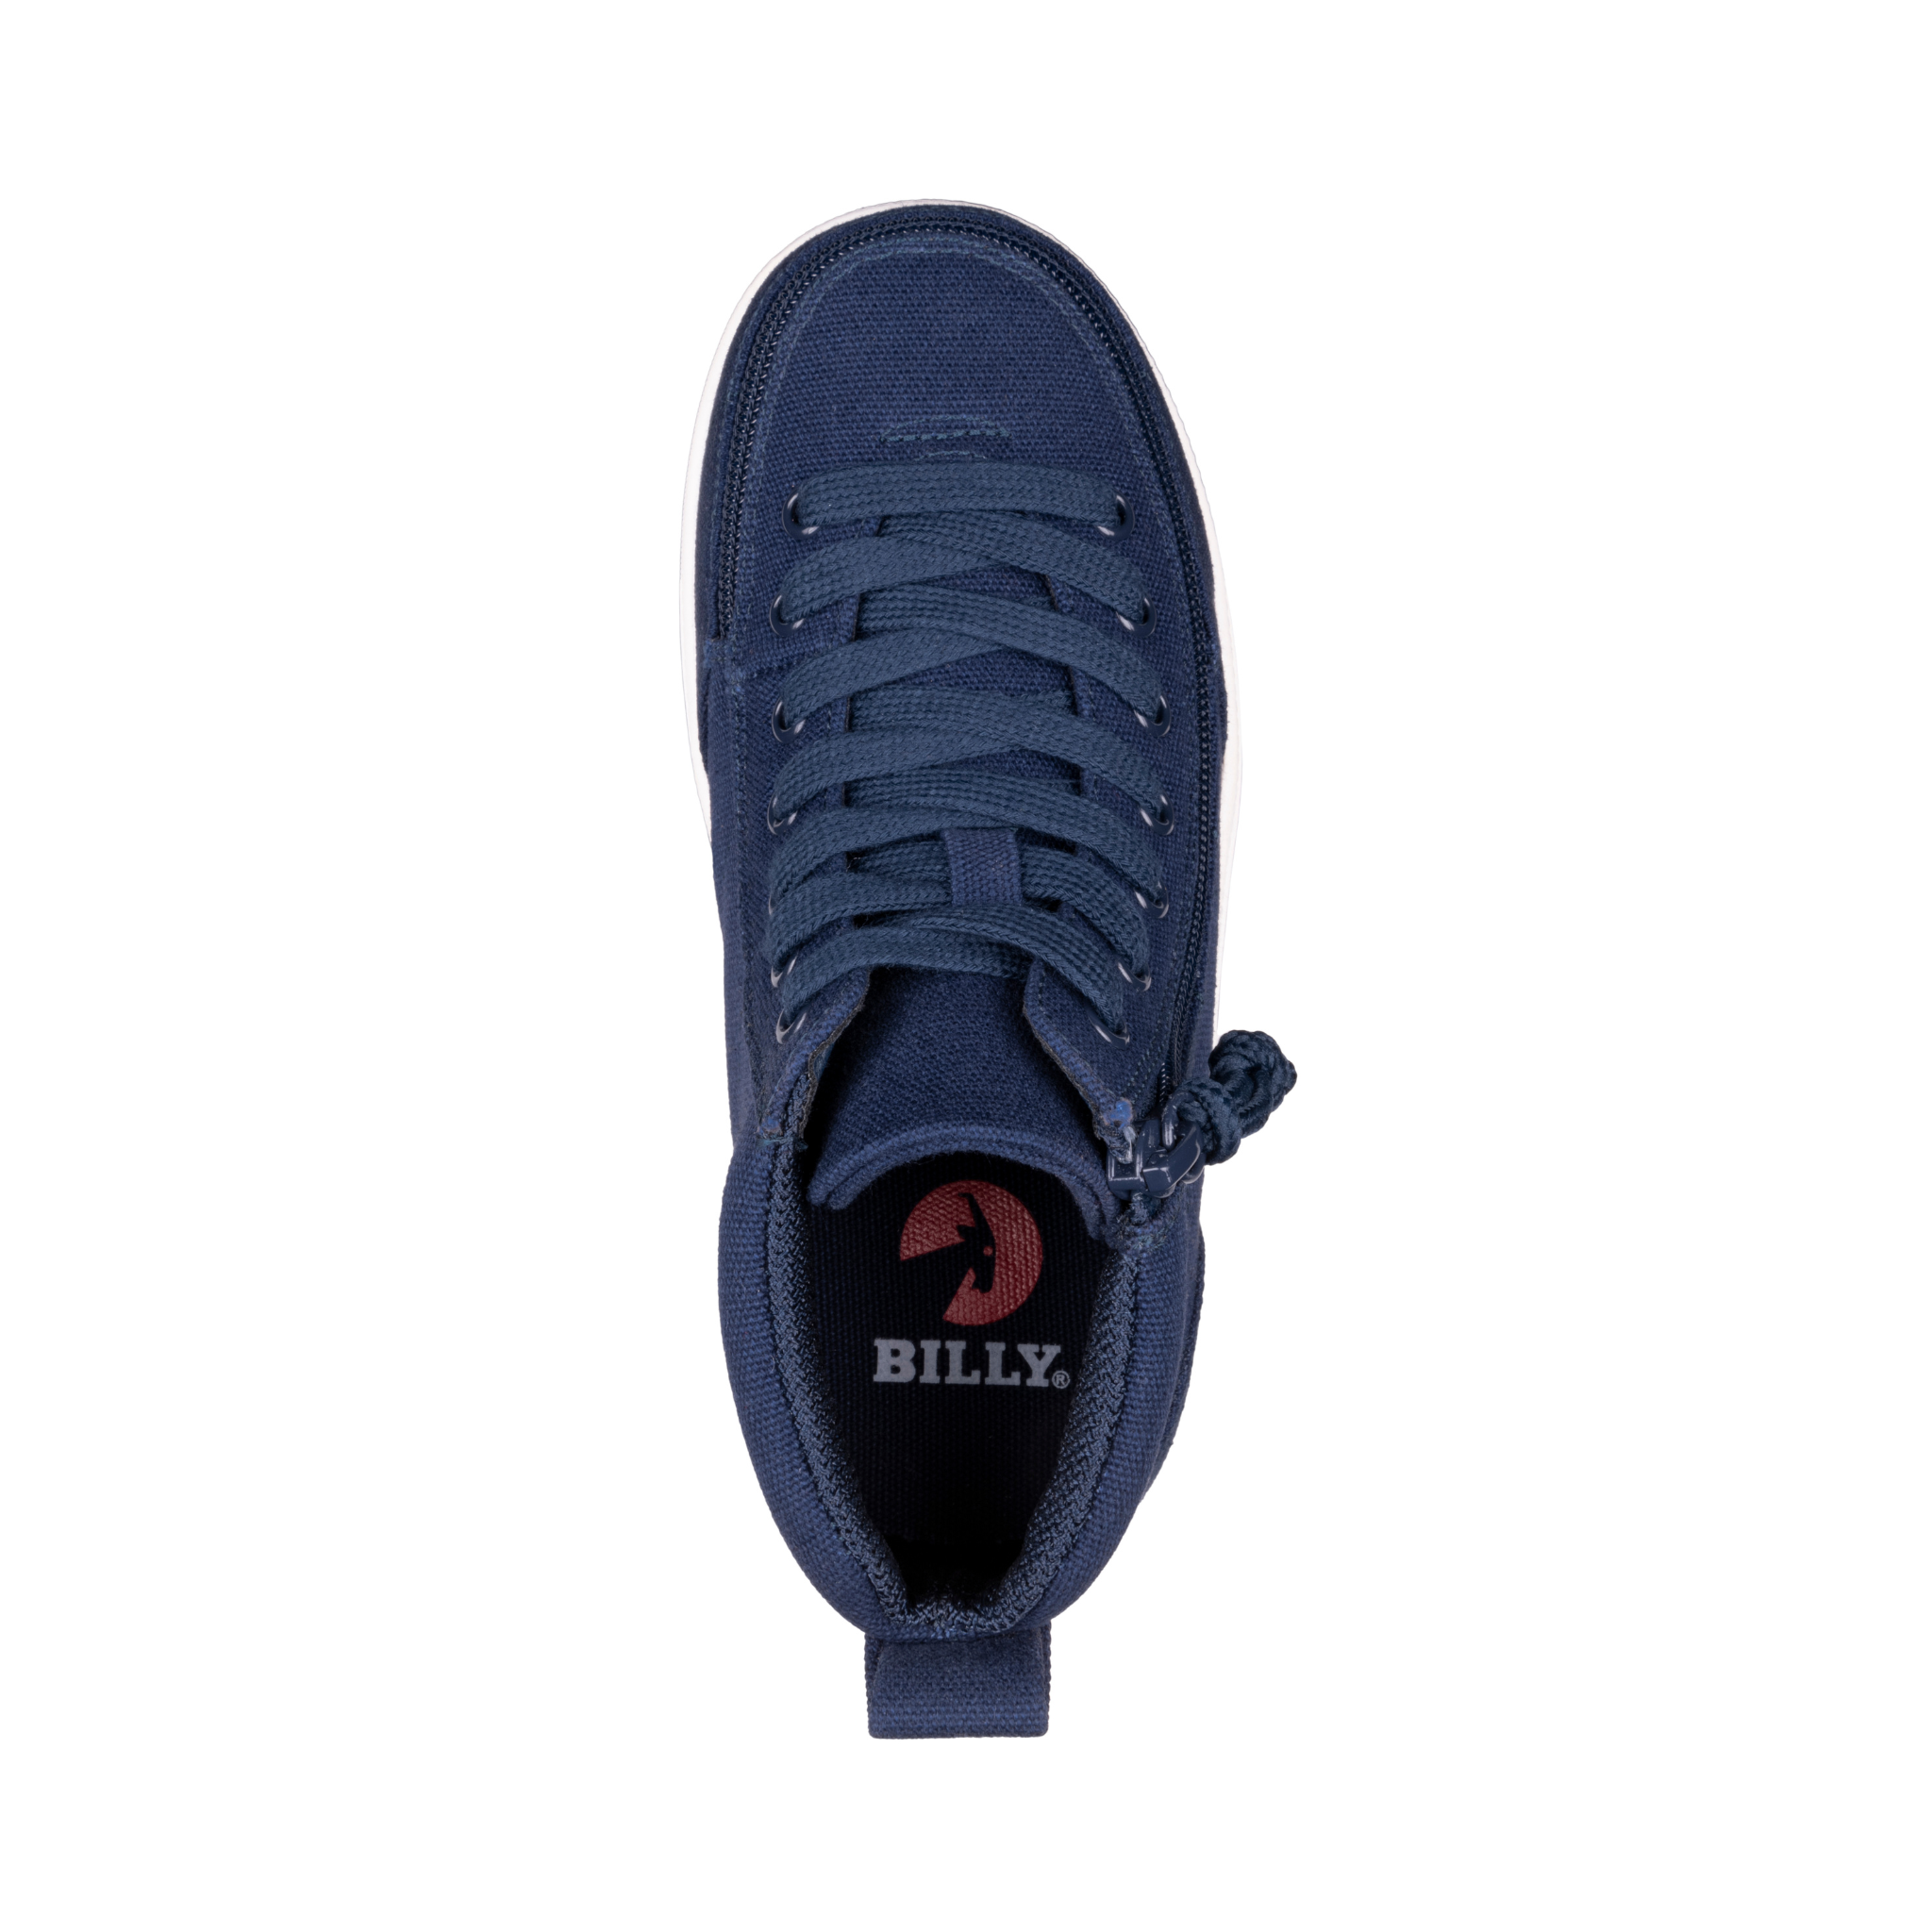 Billy Footwear (Kids) DR II Fit - High Top DR II Navy Canvas Shoes